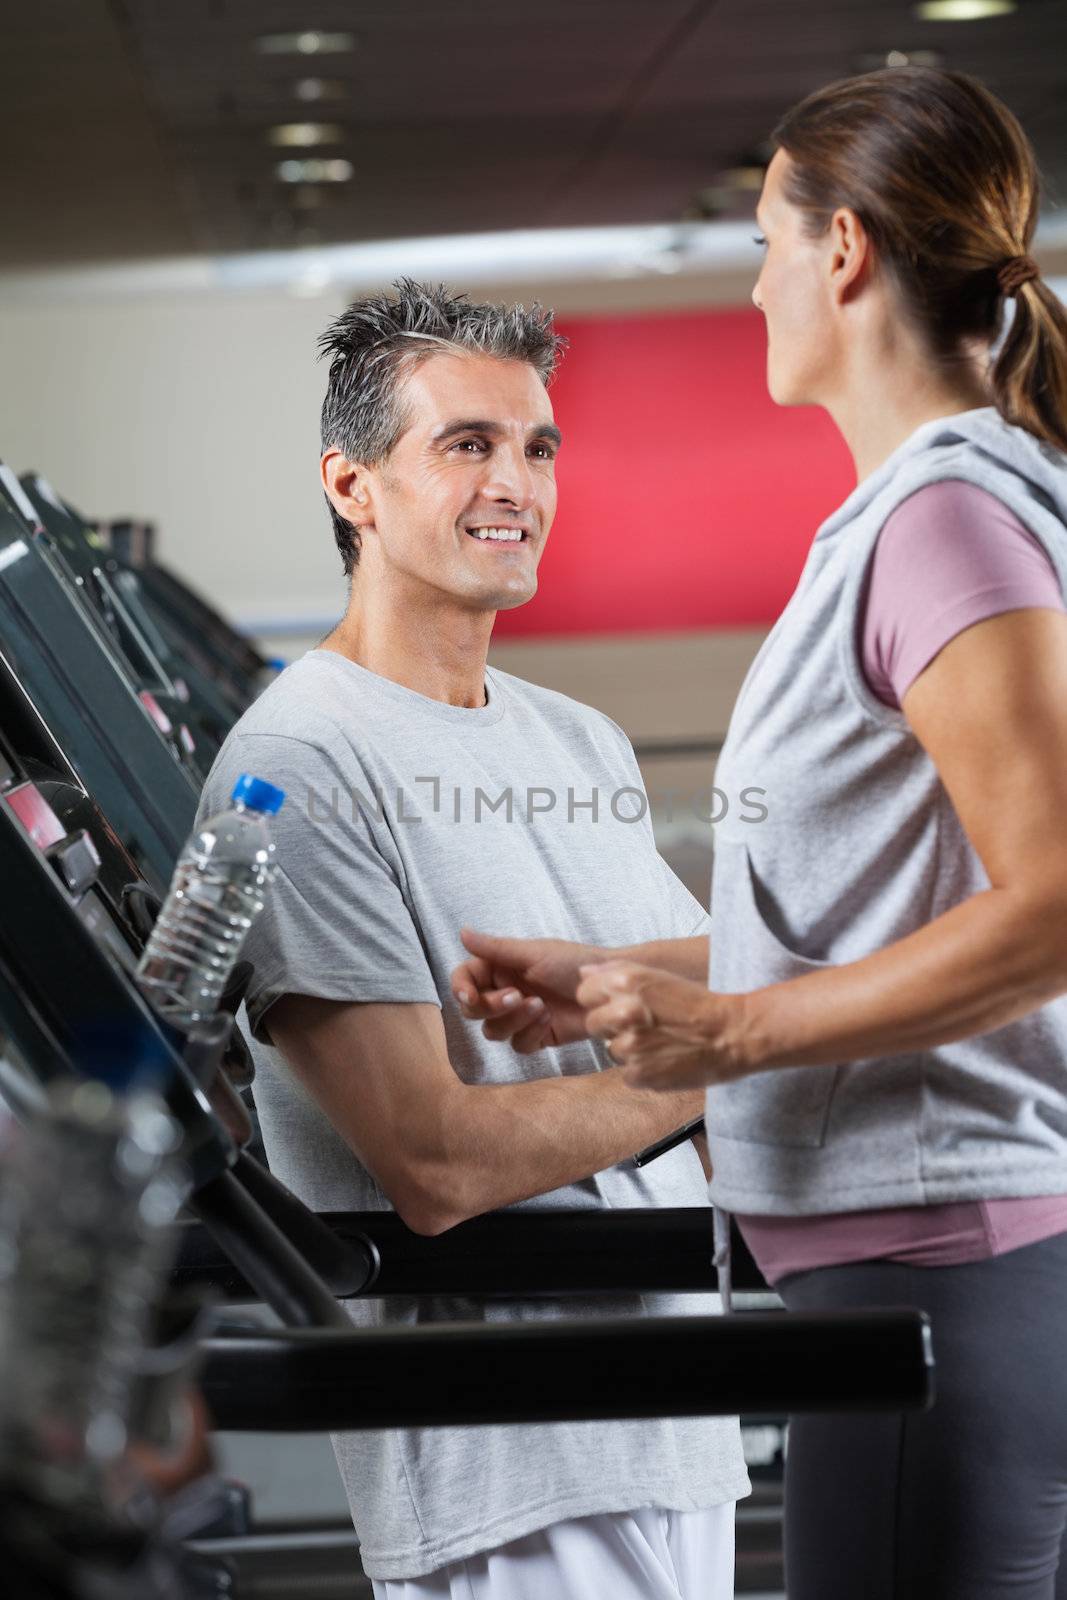 Instructor Looking At Female Client Exercising On Treadmill by leaf